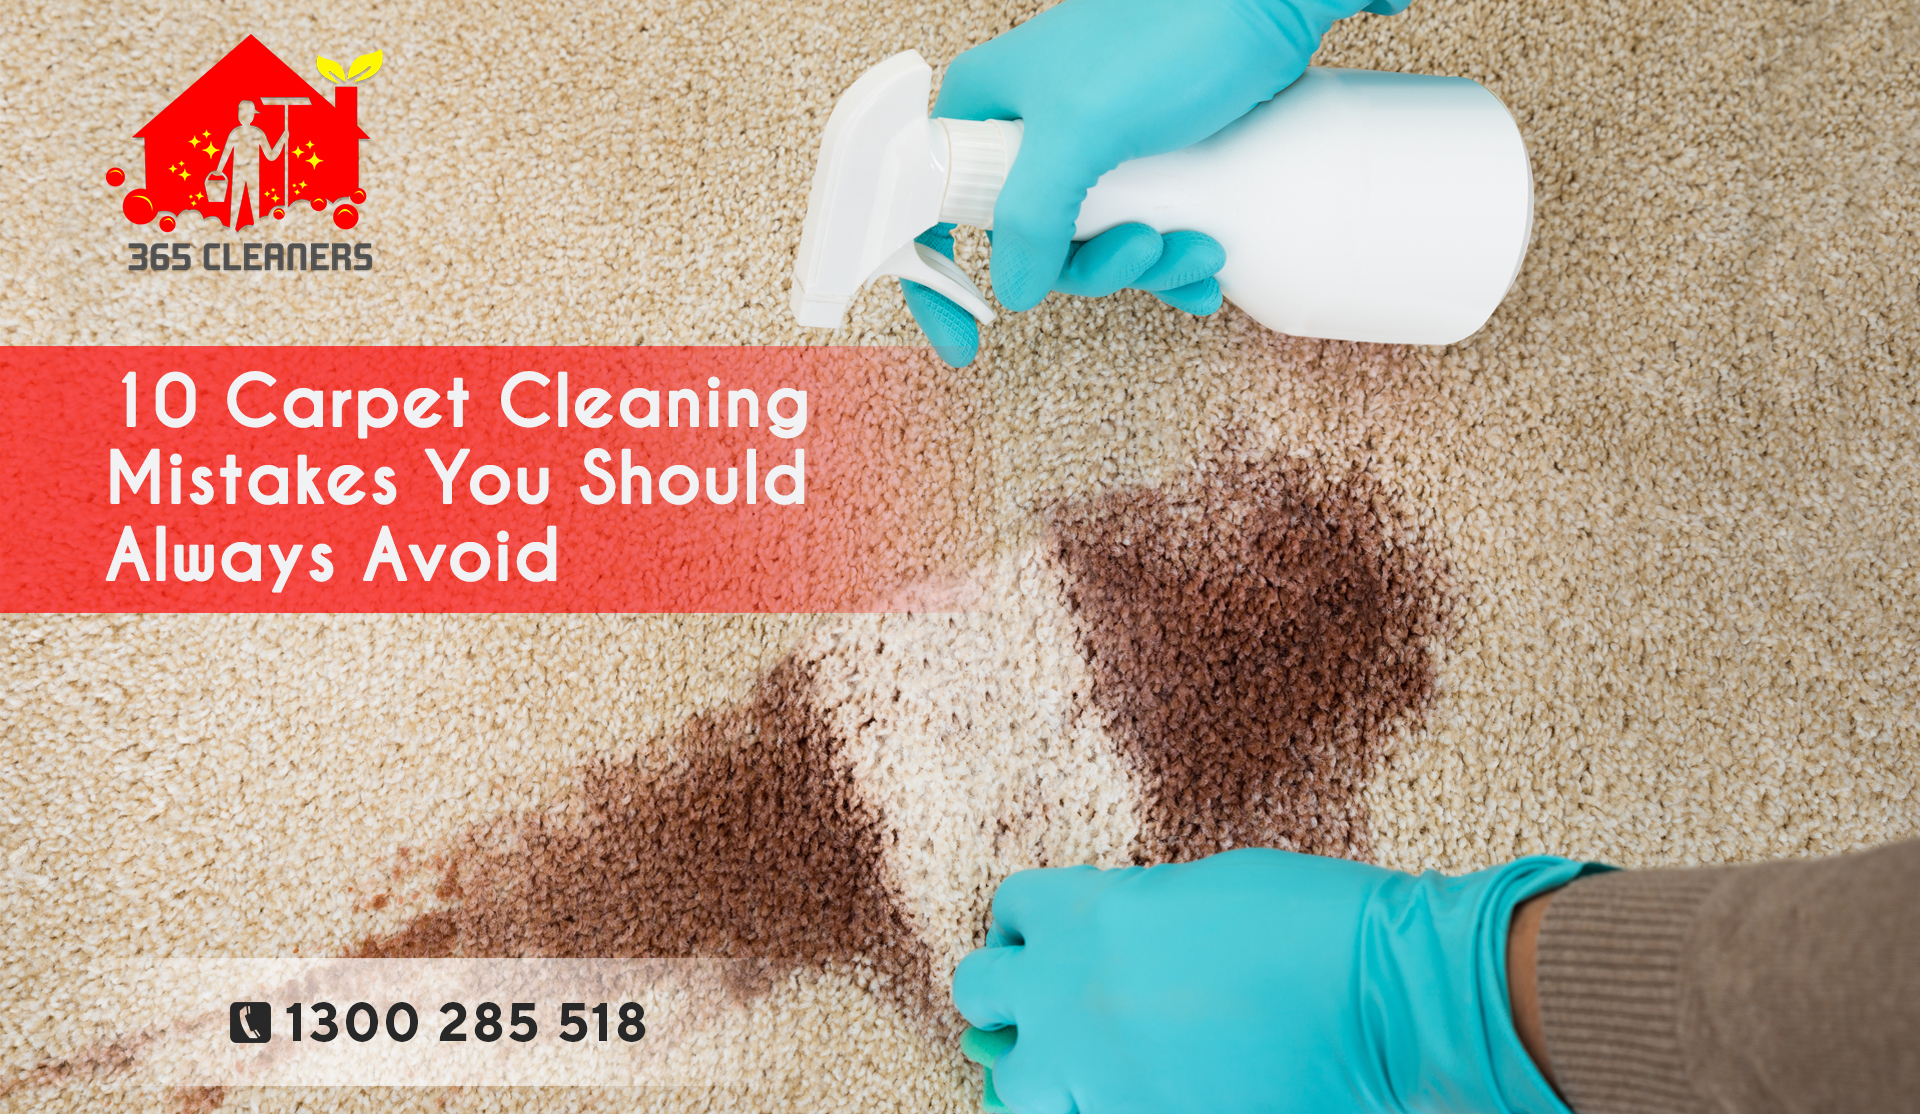 10 Carpet Cleaning Mistakes You Should Always Avoid